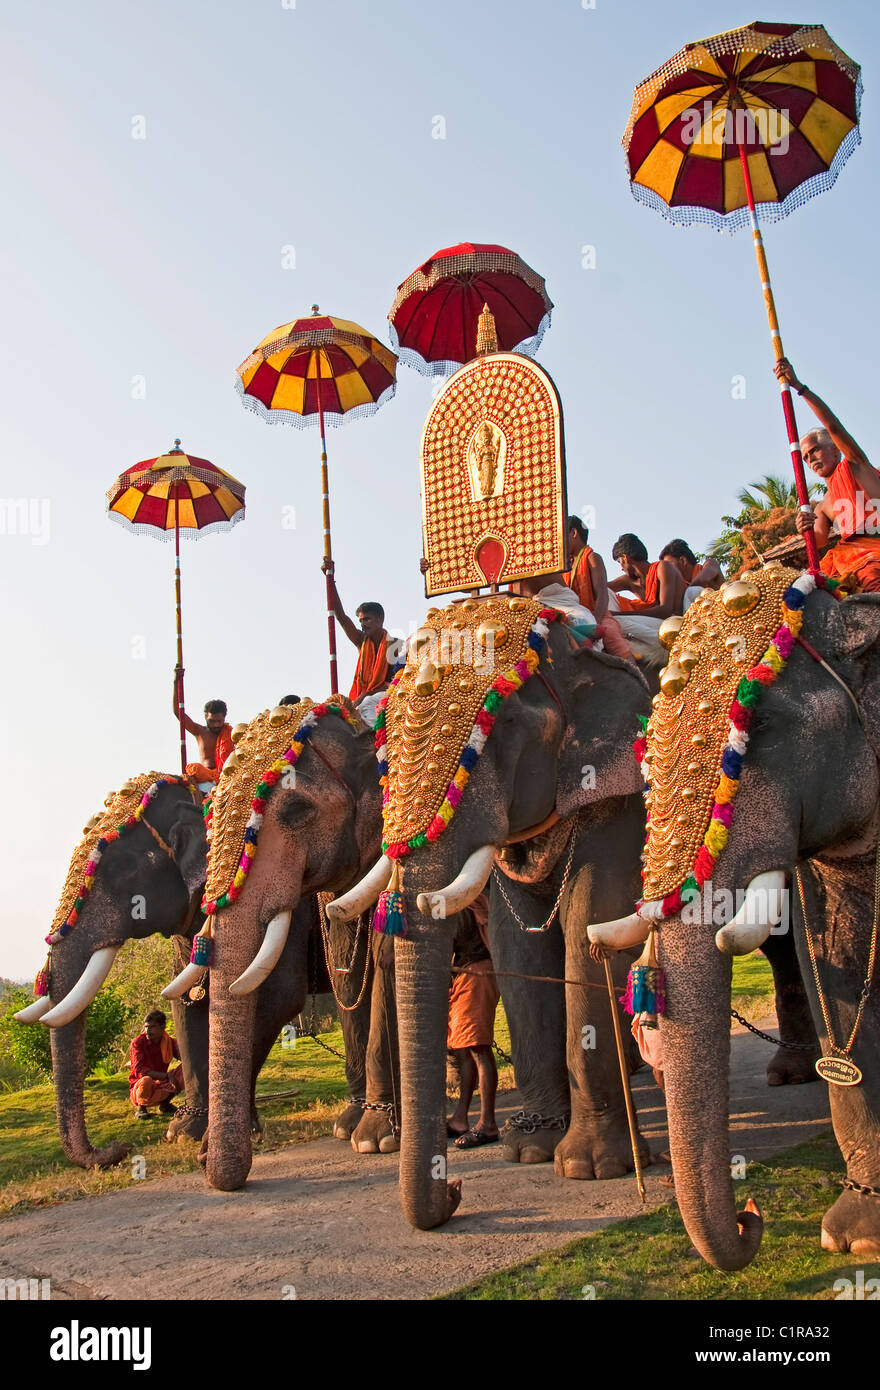 Gold-caparisoned elephants are featured at the Thrissur Pooram, a Hindu temple-centered festival of Kerala. Stock Photo